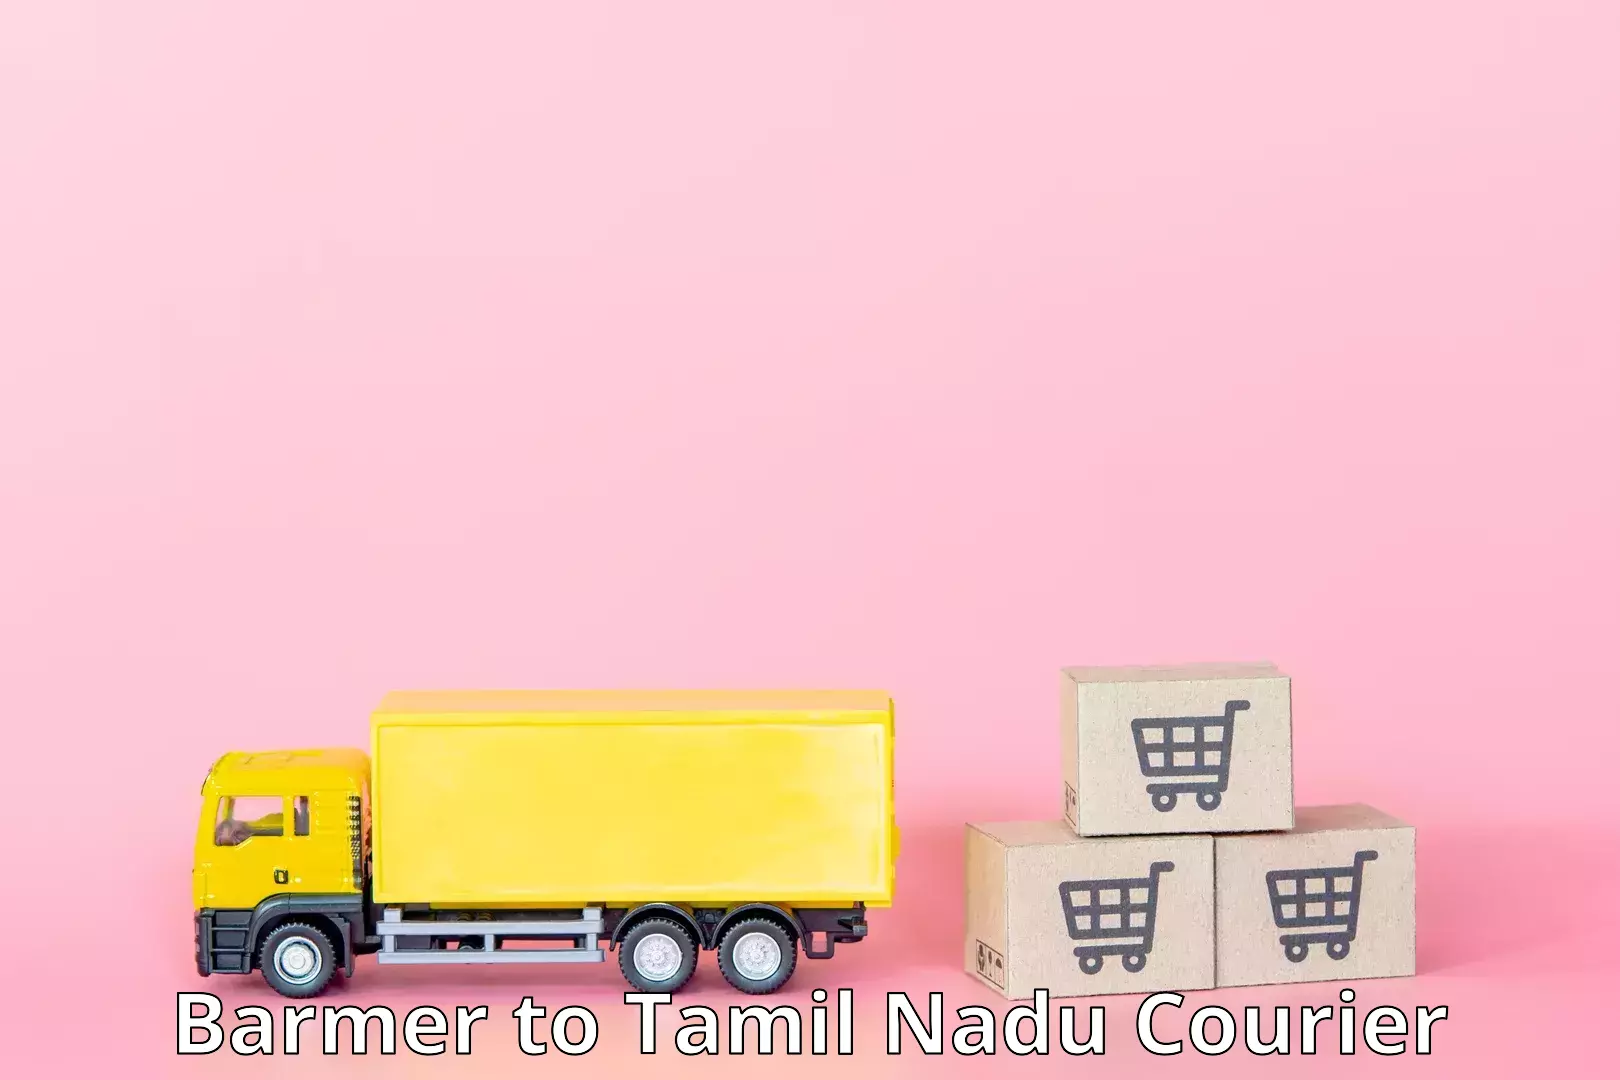 Tech-enabled shipping in Barmer to Karur